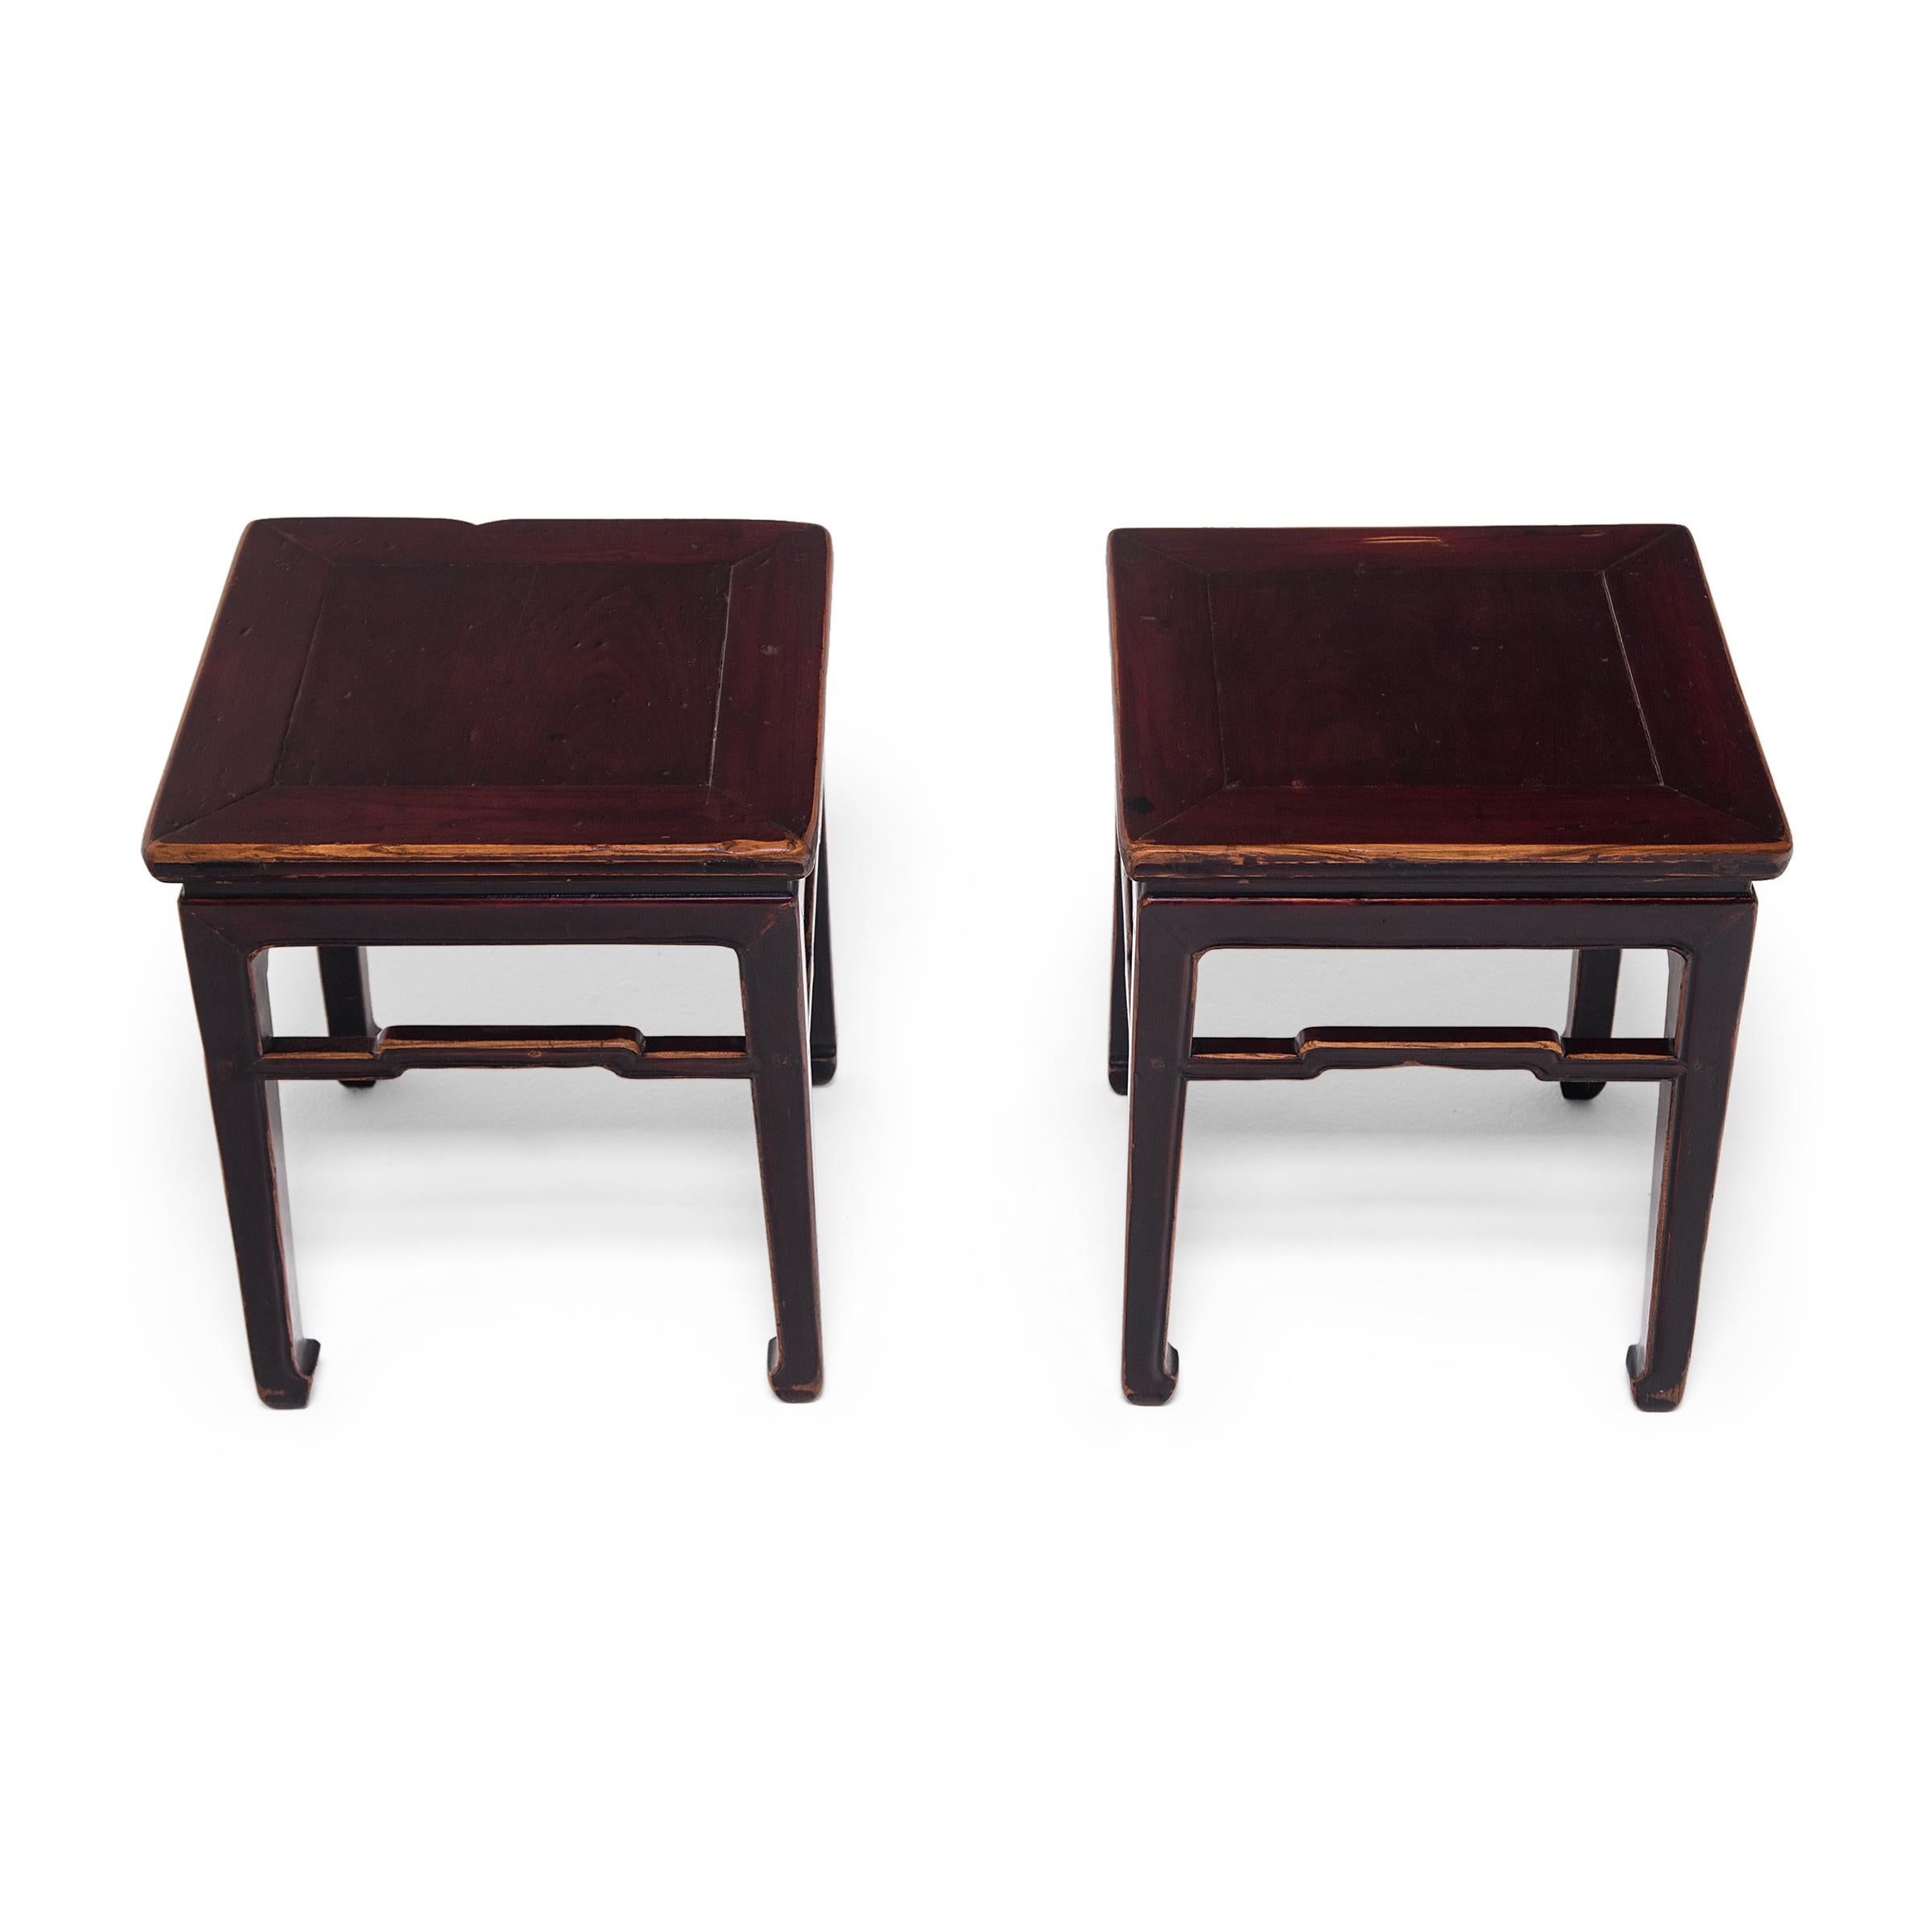 Lacquered Pair of Chinese Square Stools with Humpback Stretchers, c. 1850